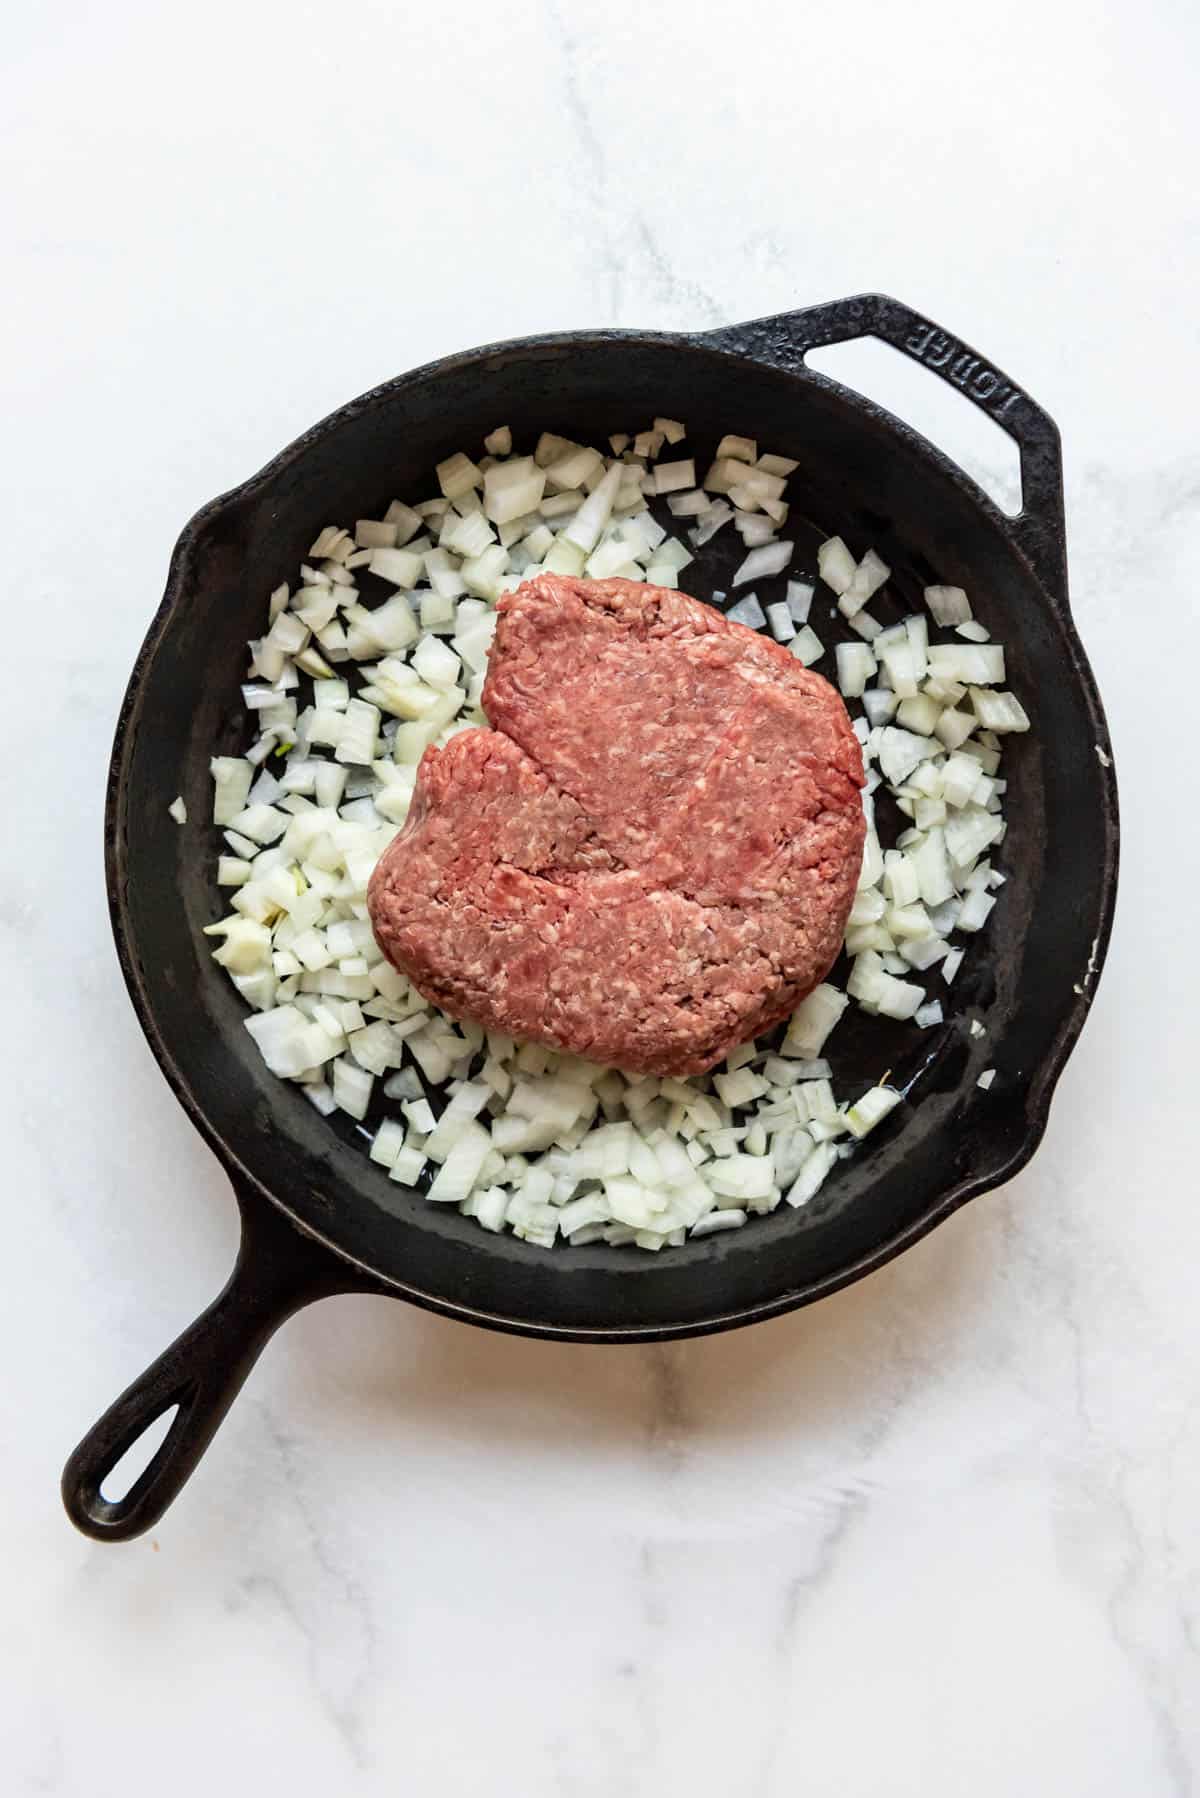 Adding ground beef to a pan of chopped onions.